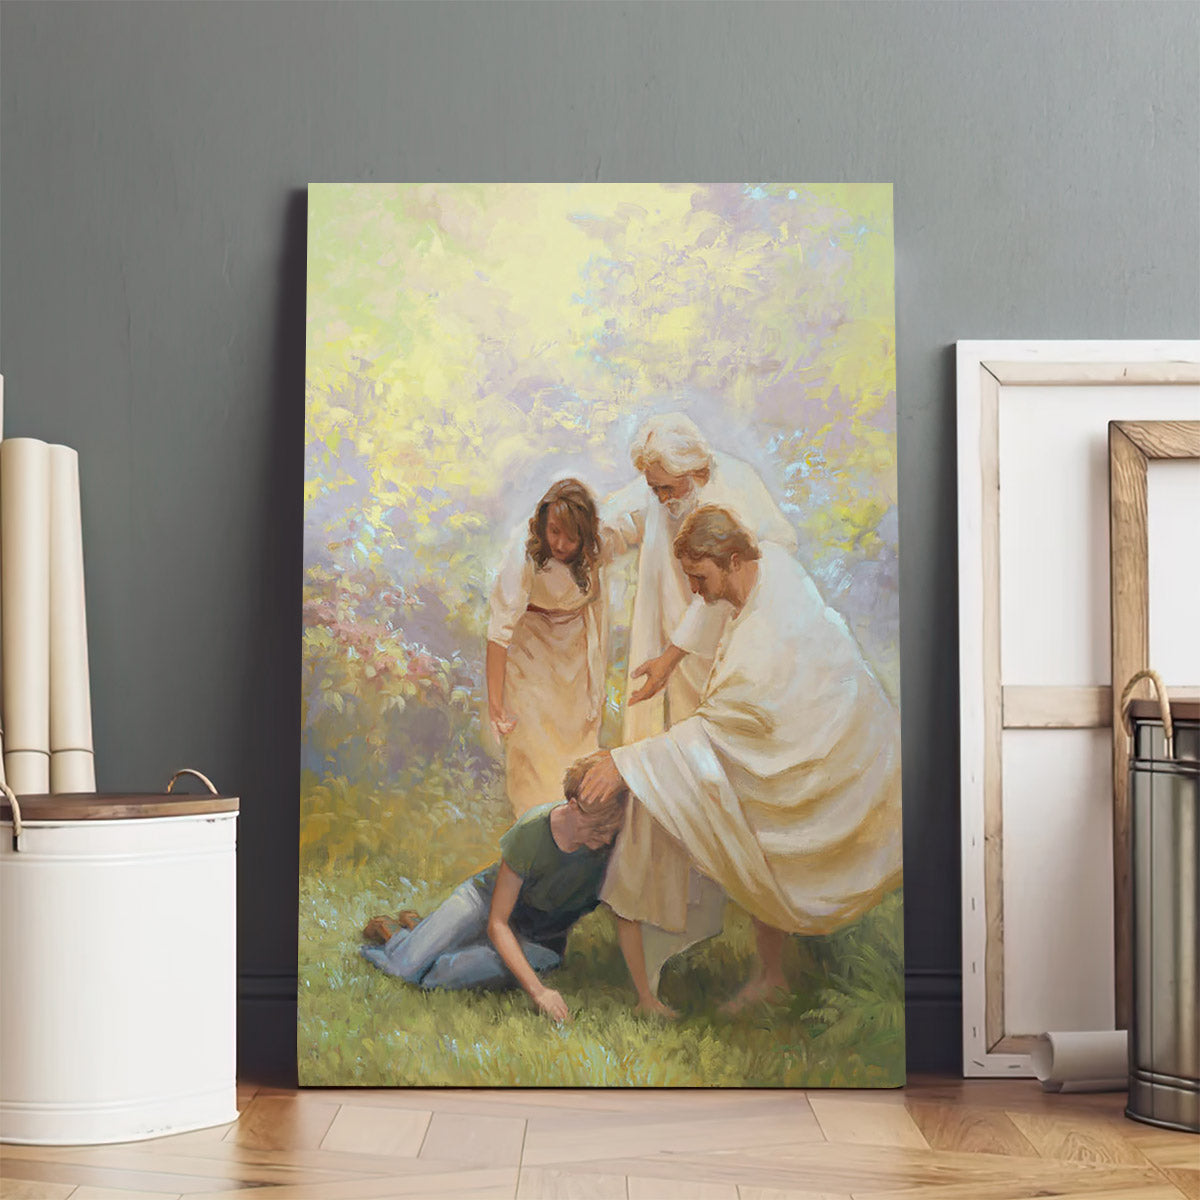 Ministering Canvas Pictures - Jesus Canvas Art - Christian Wall Art